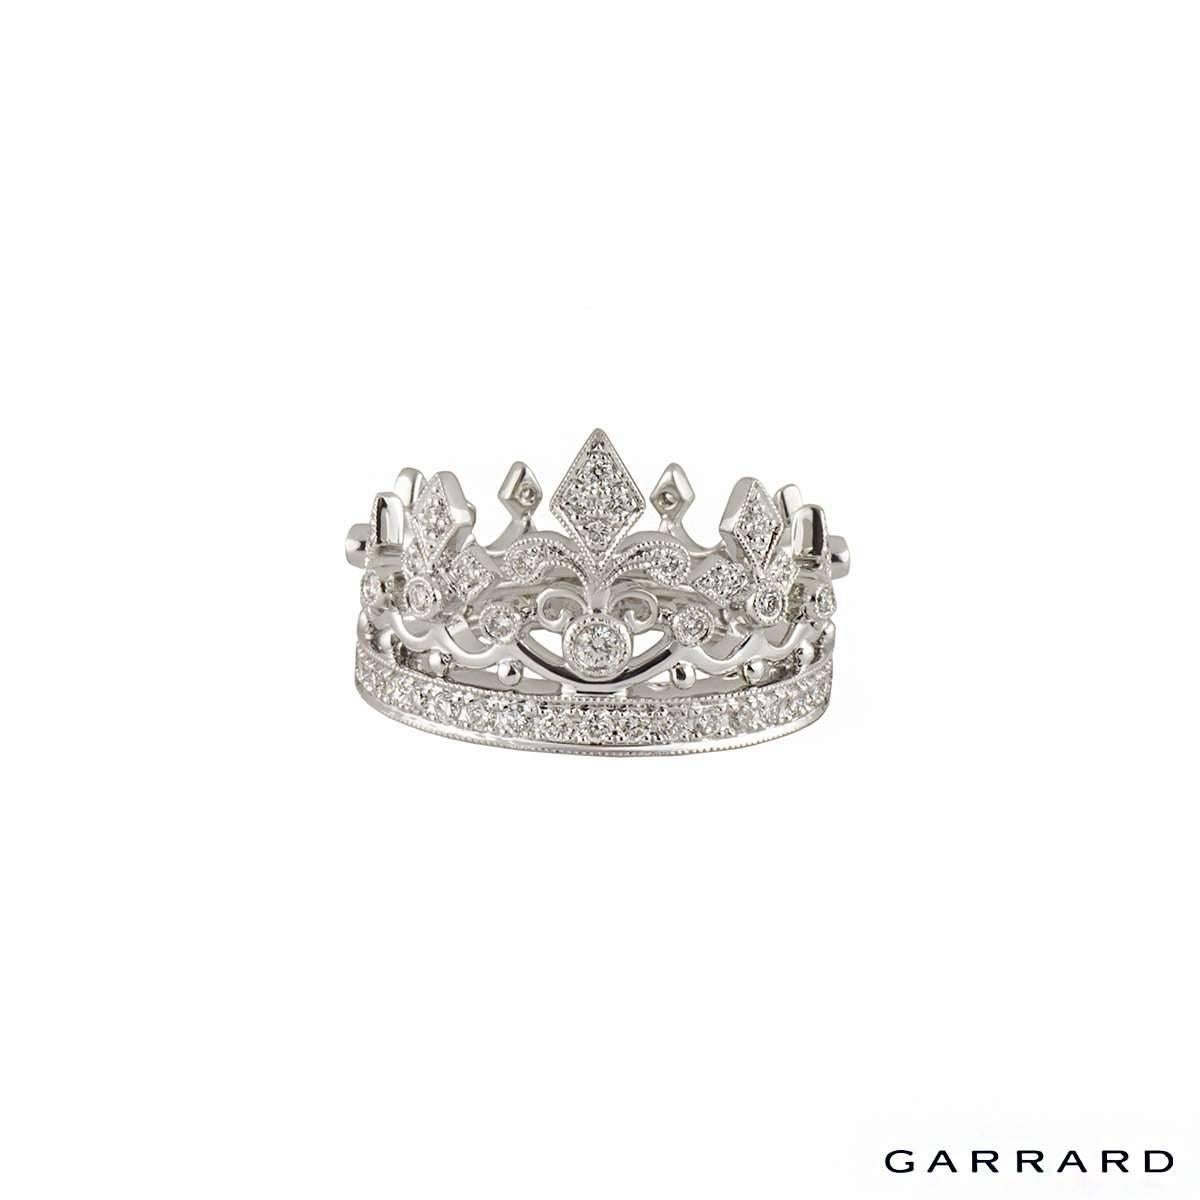 A unique and beautiful 18k white gold Garrard diamond ring. The ring comprises of a princess crown motif with pave set round brilliant diamonds throughout the ring. There are a total of 68 diamonds through the ring and has an approximate weight of